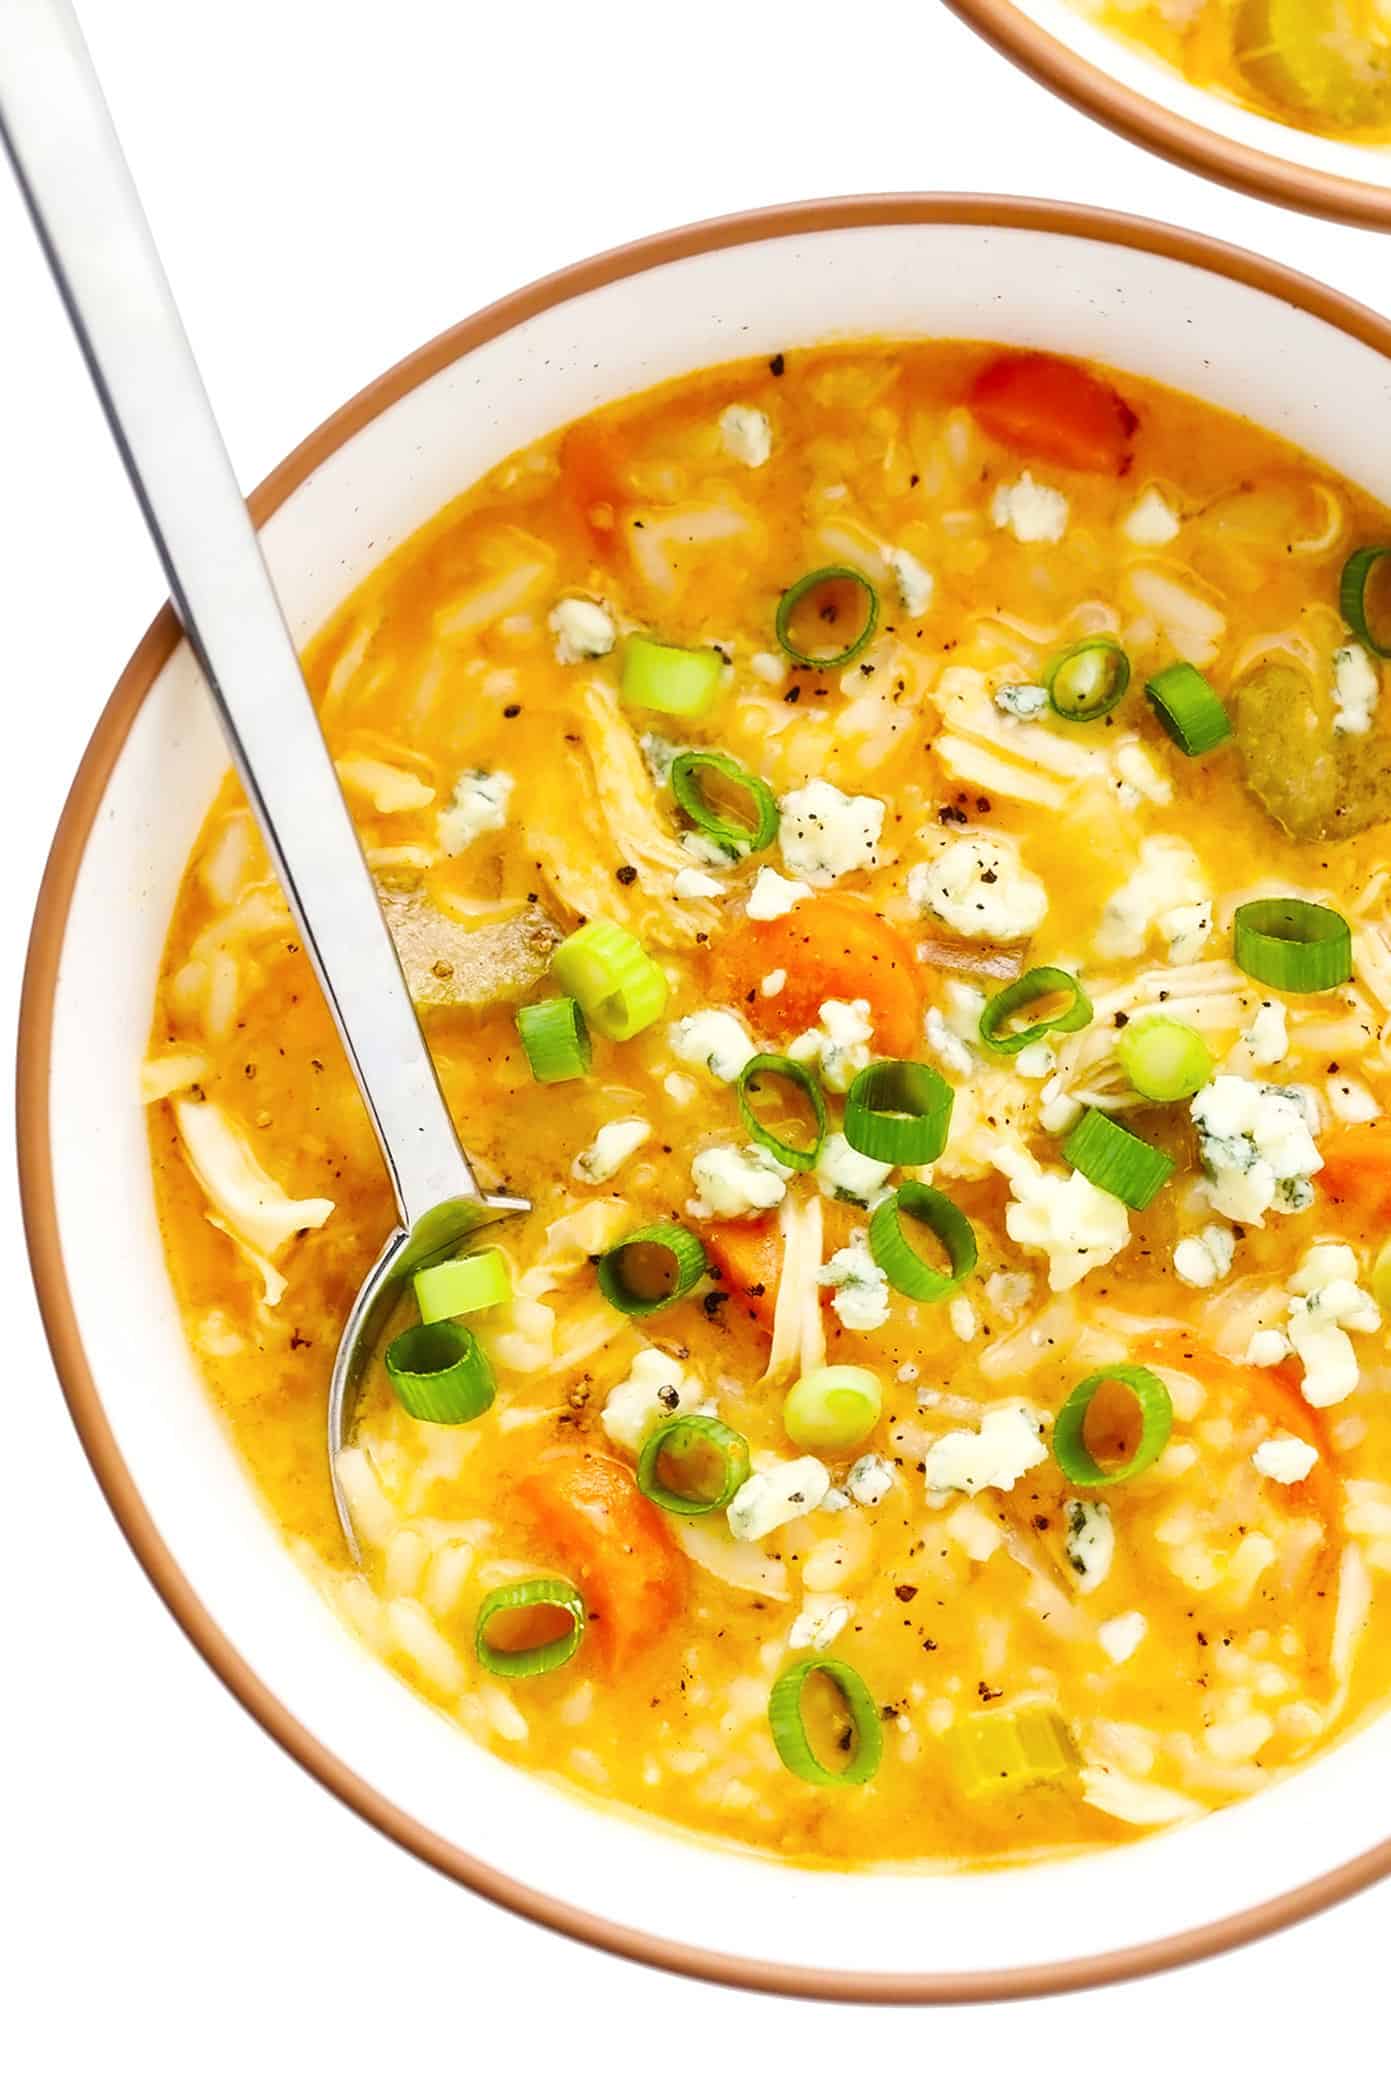 https://www.gimmesomeoven.com/wp-content/uploads/2021/09/Creamy-Buffalo-Chicken-and-Rice-Soup-Recipe-6-1.jpg